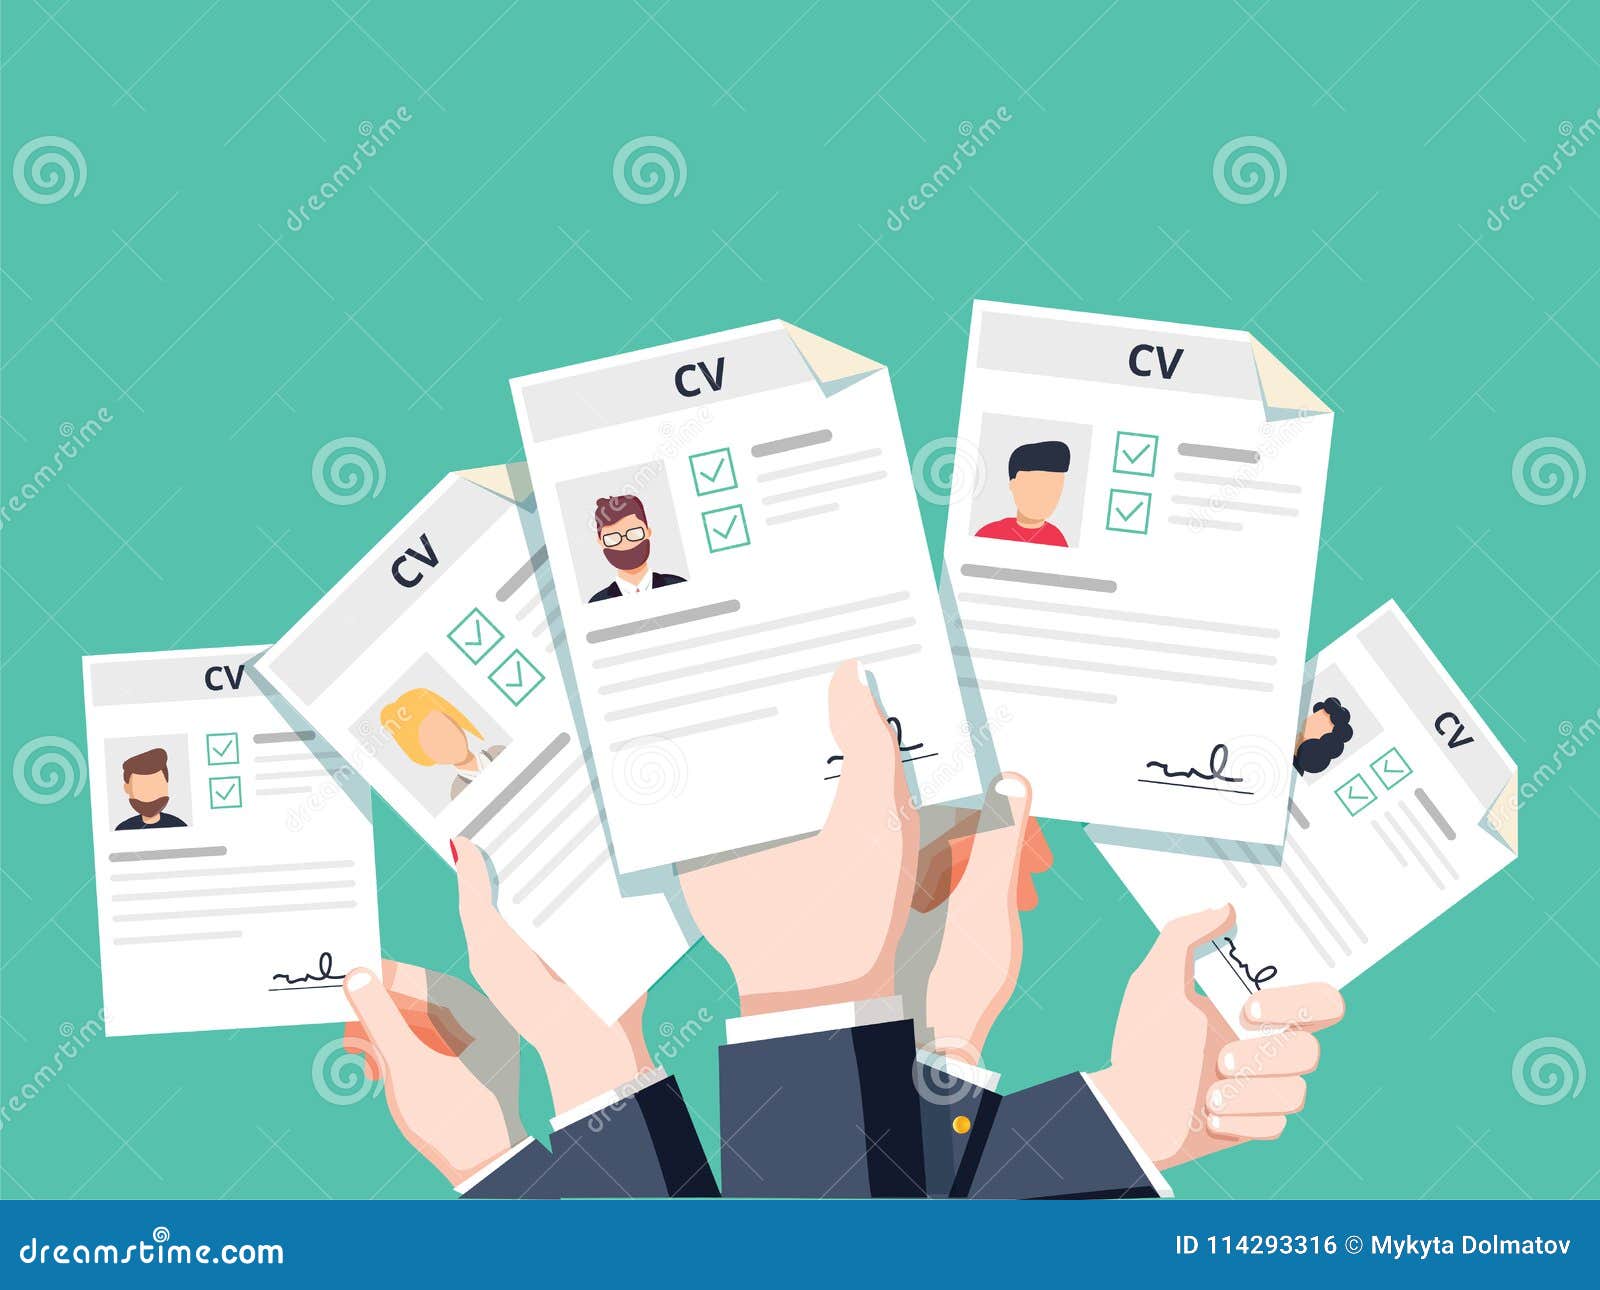 Hands Holding CV Papers. Human Resources Management Concept